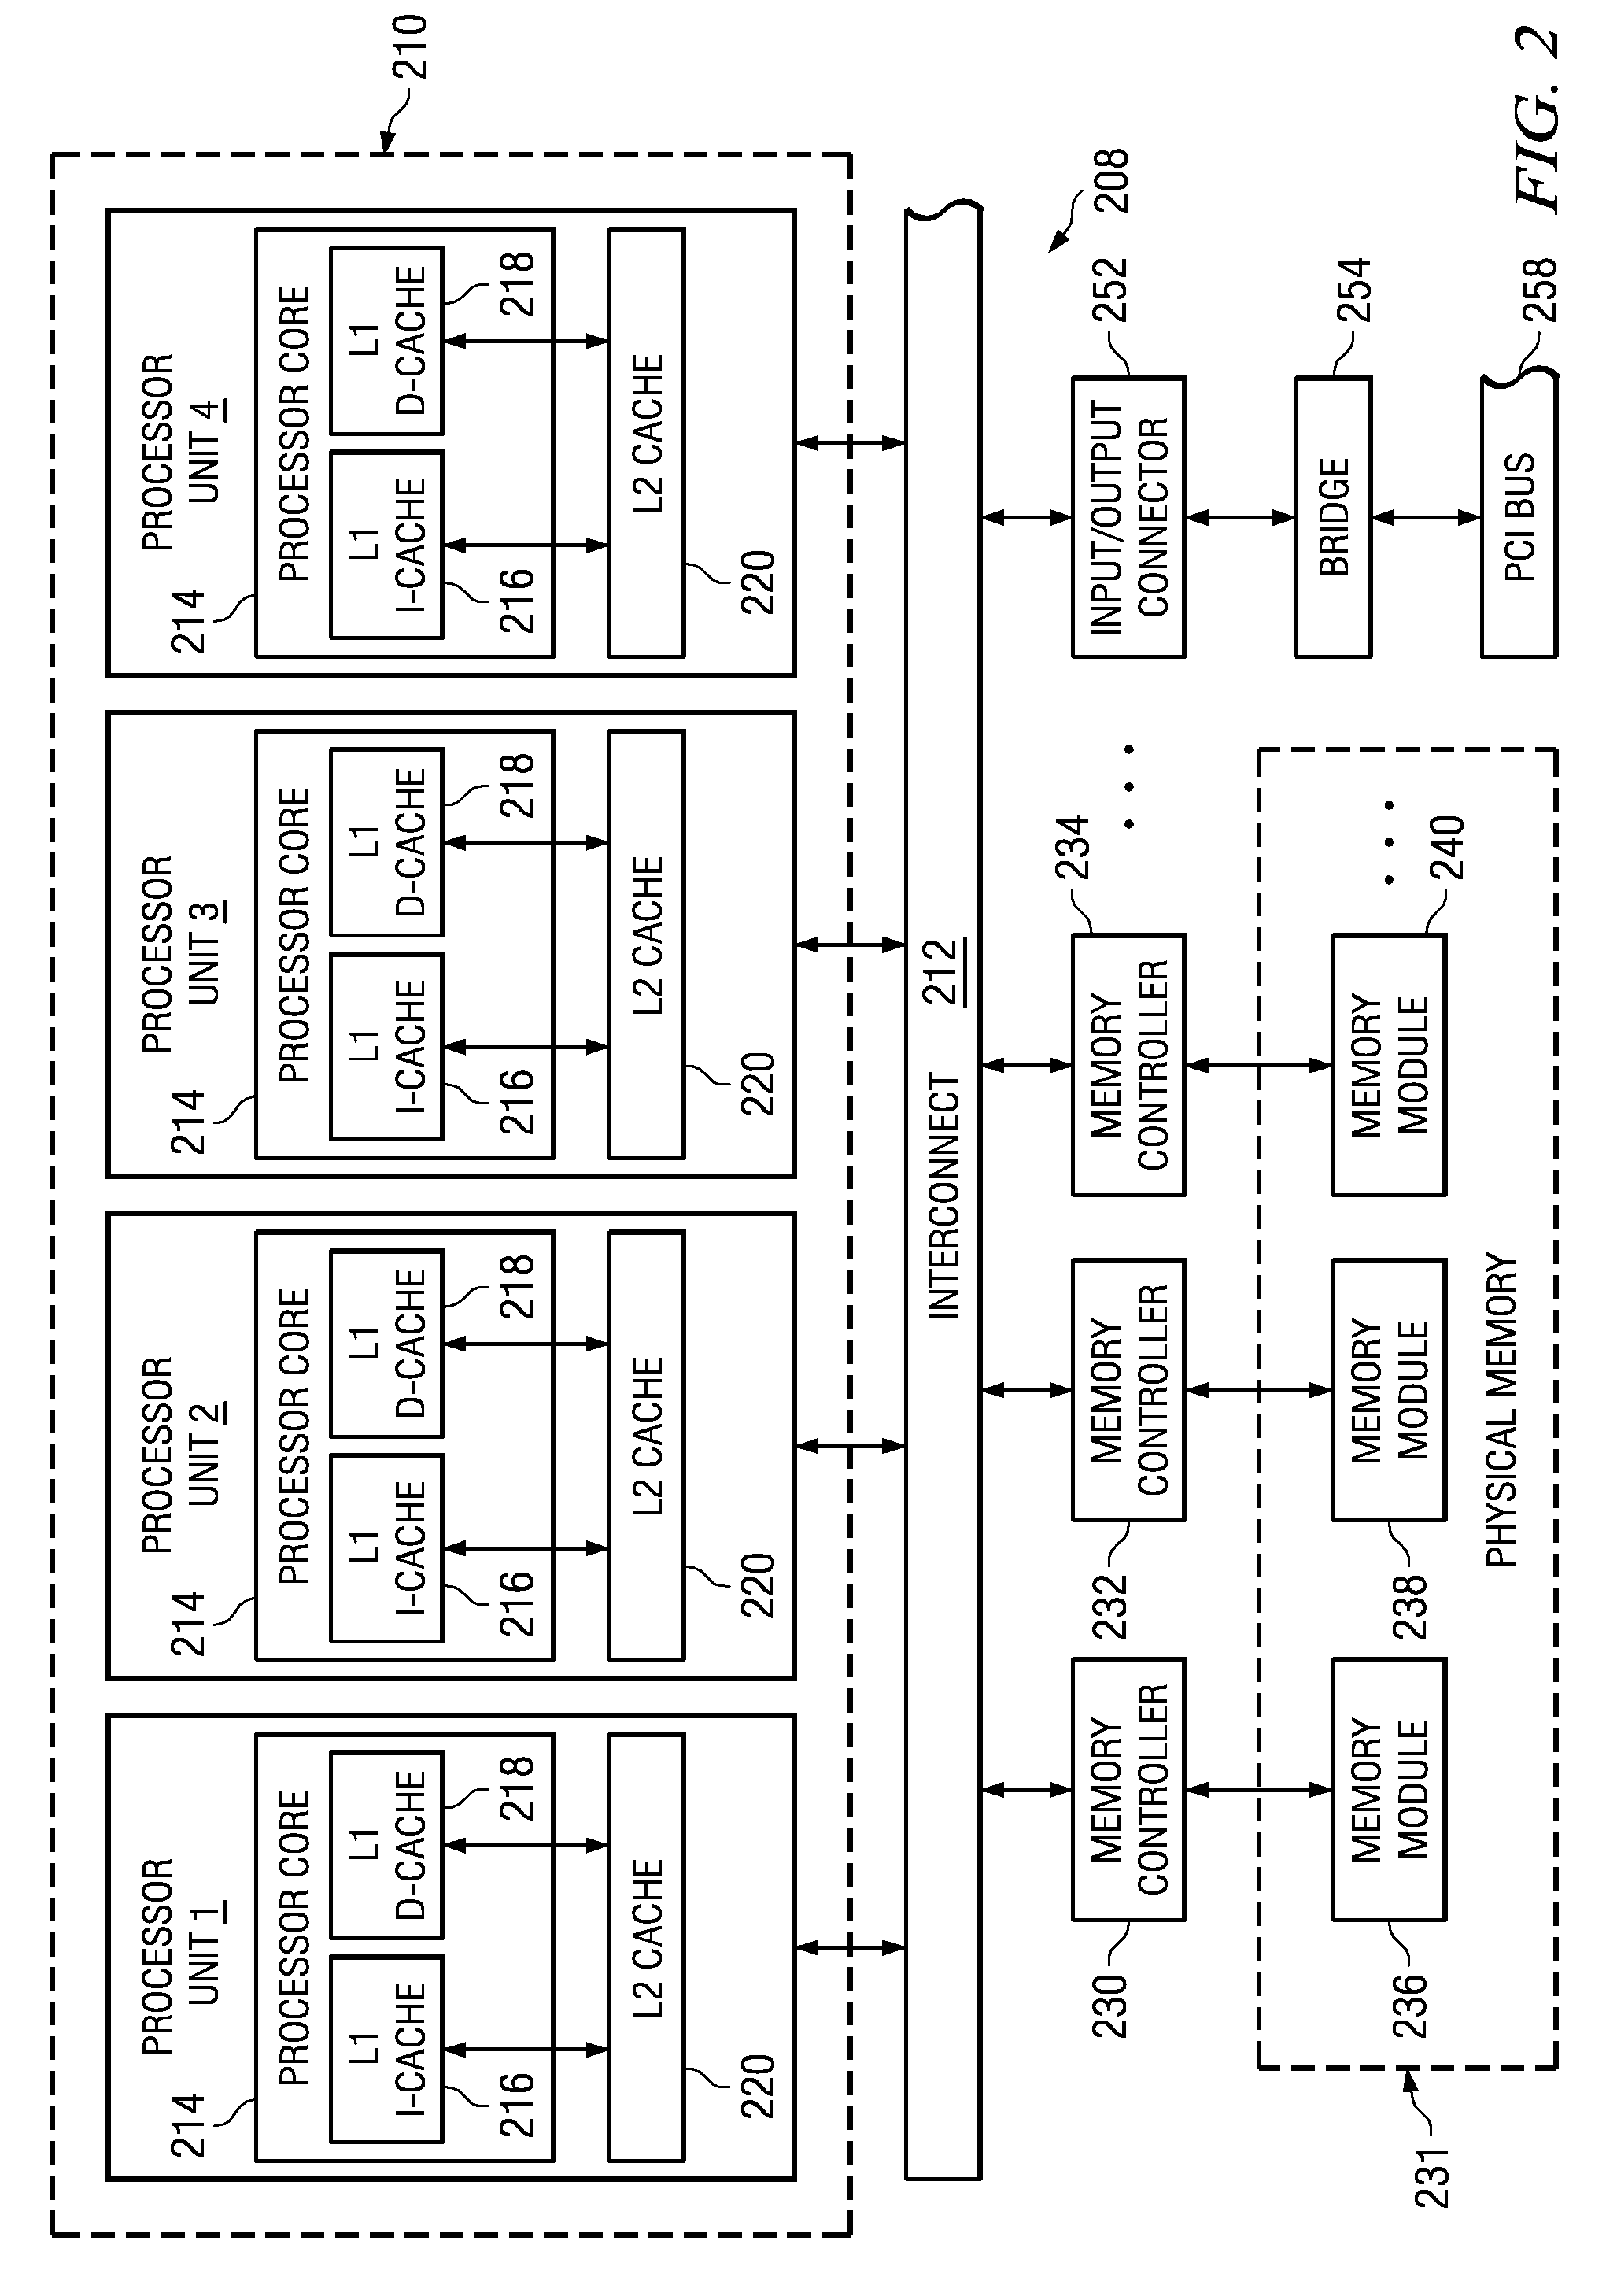 System and Method for Performing Setup Operations for Receiving Different Amounts of Data While Processors are Performing Message Passing Interface Tasks